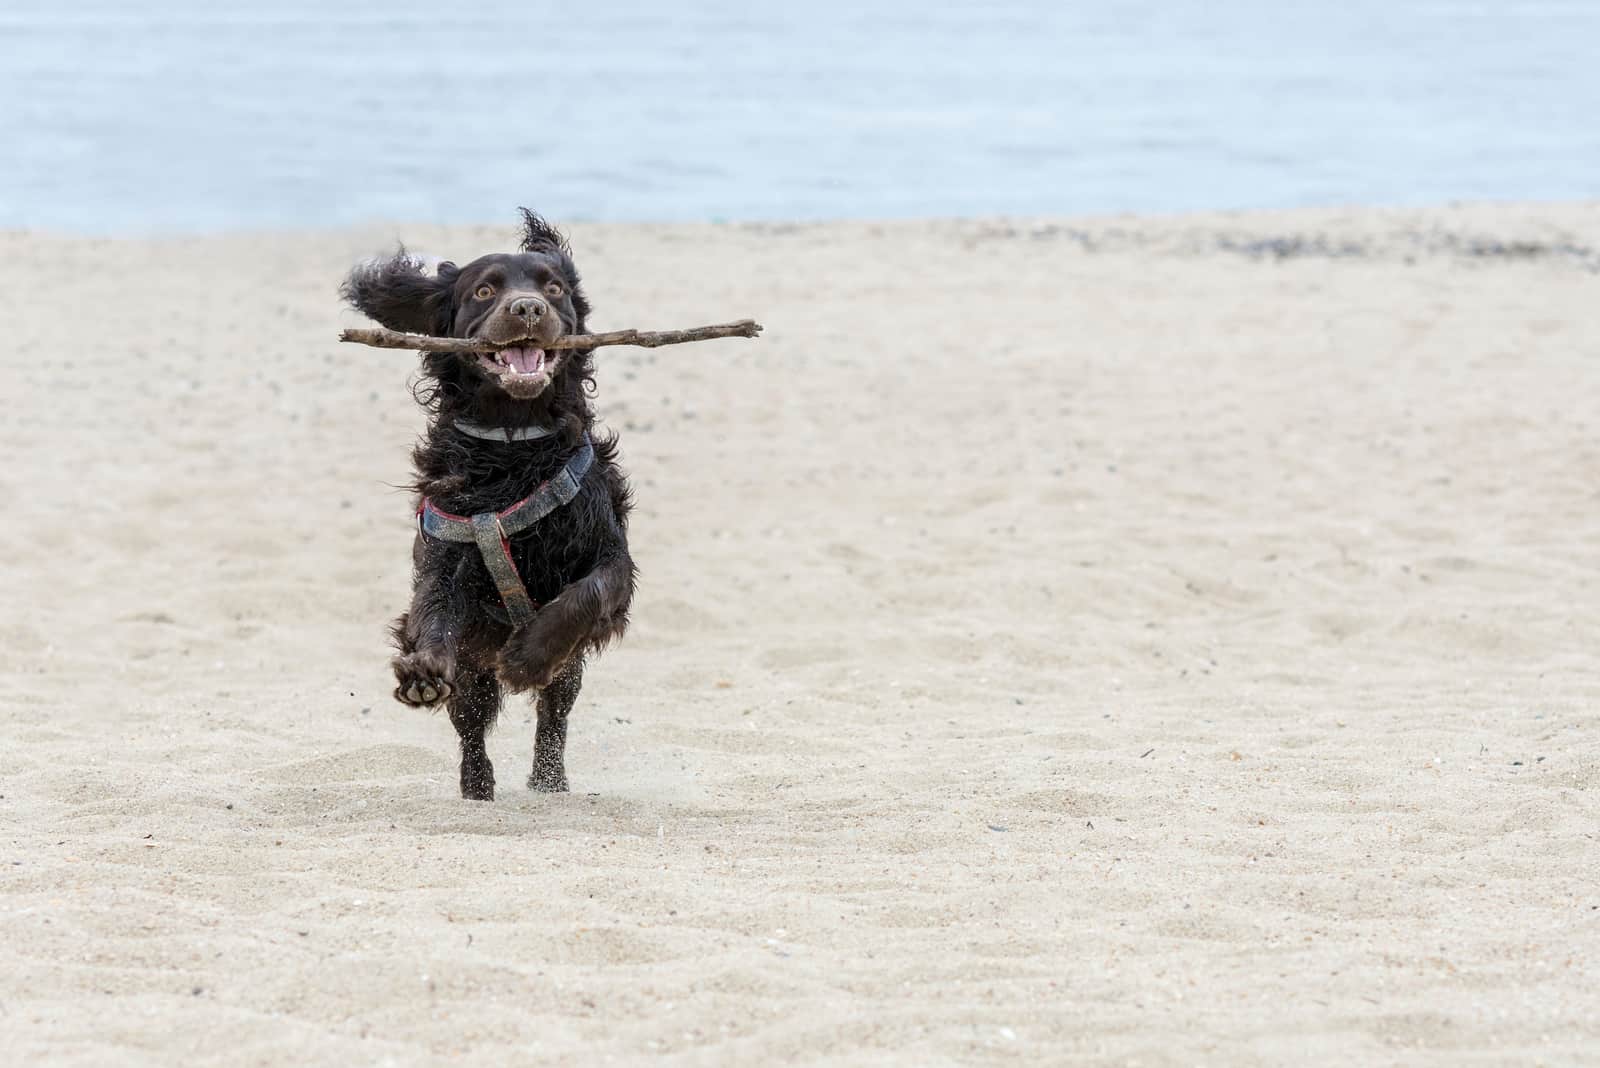 Boykin Spaniel runs along the sandy beach with a wooden branch in its mouth